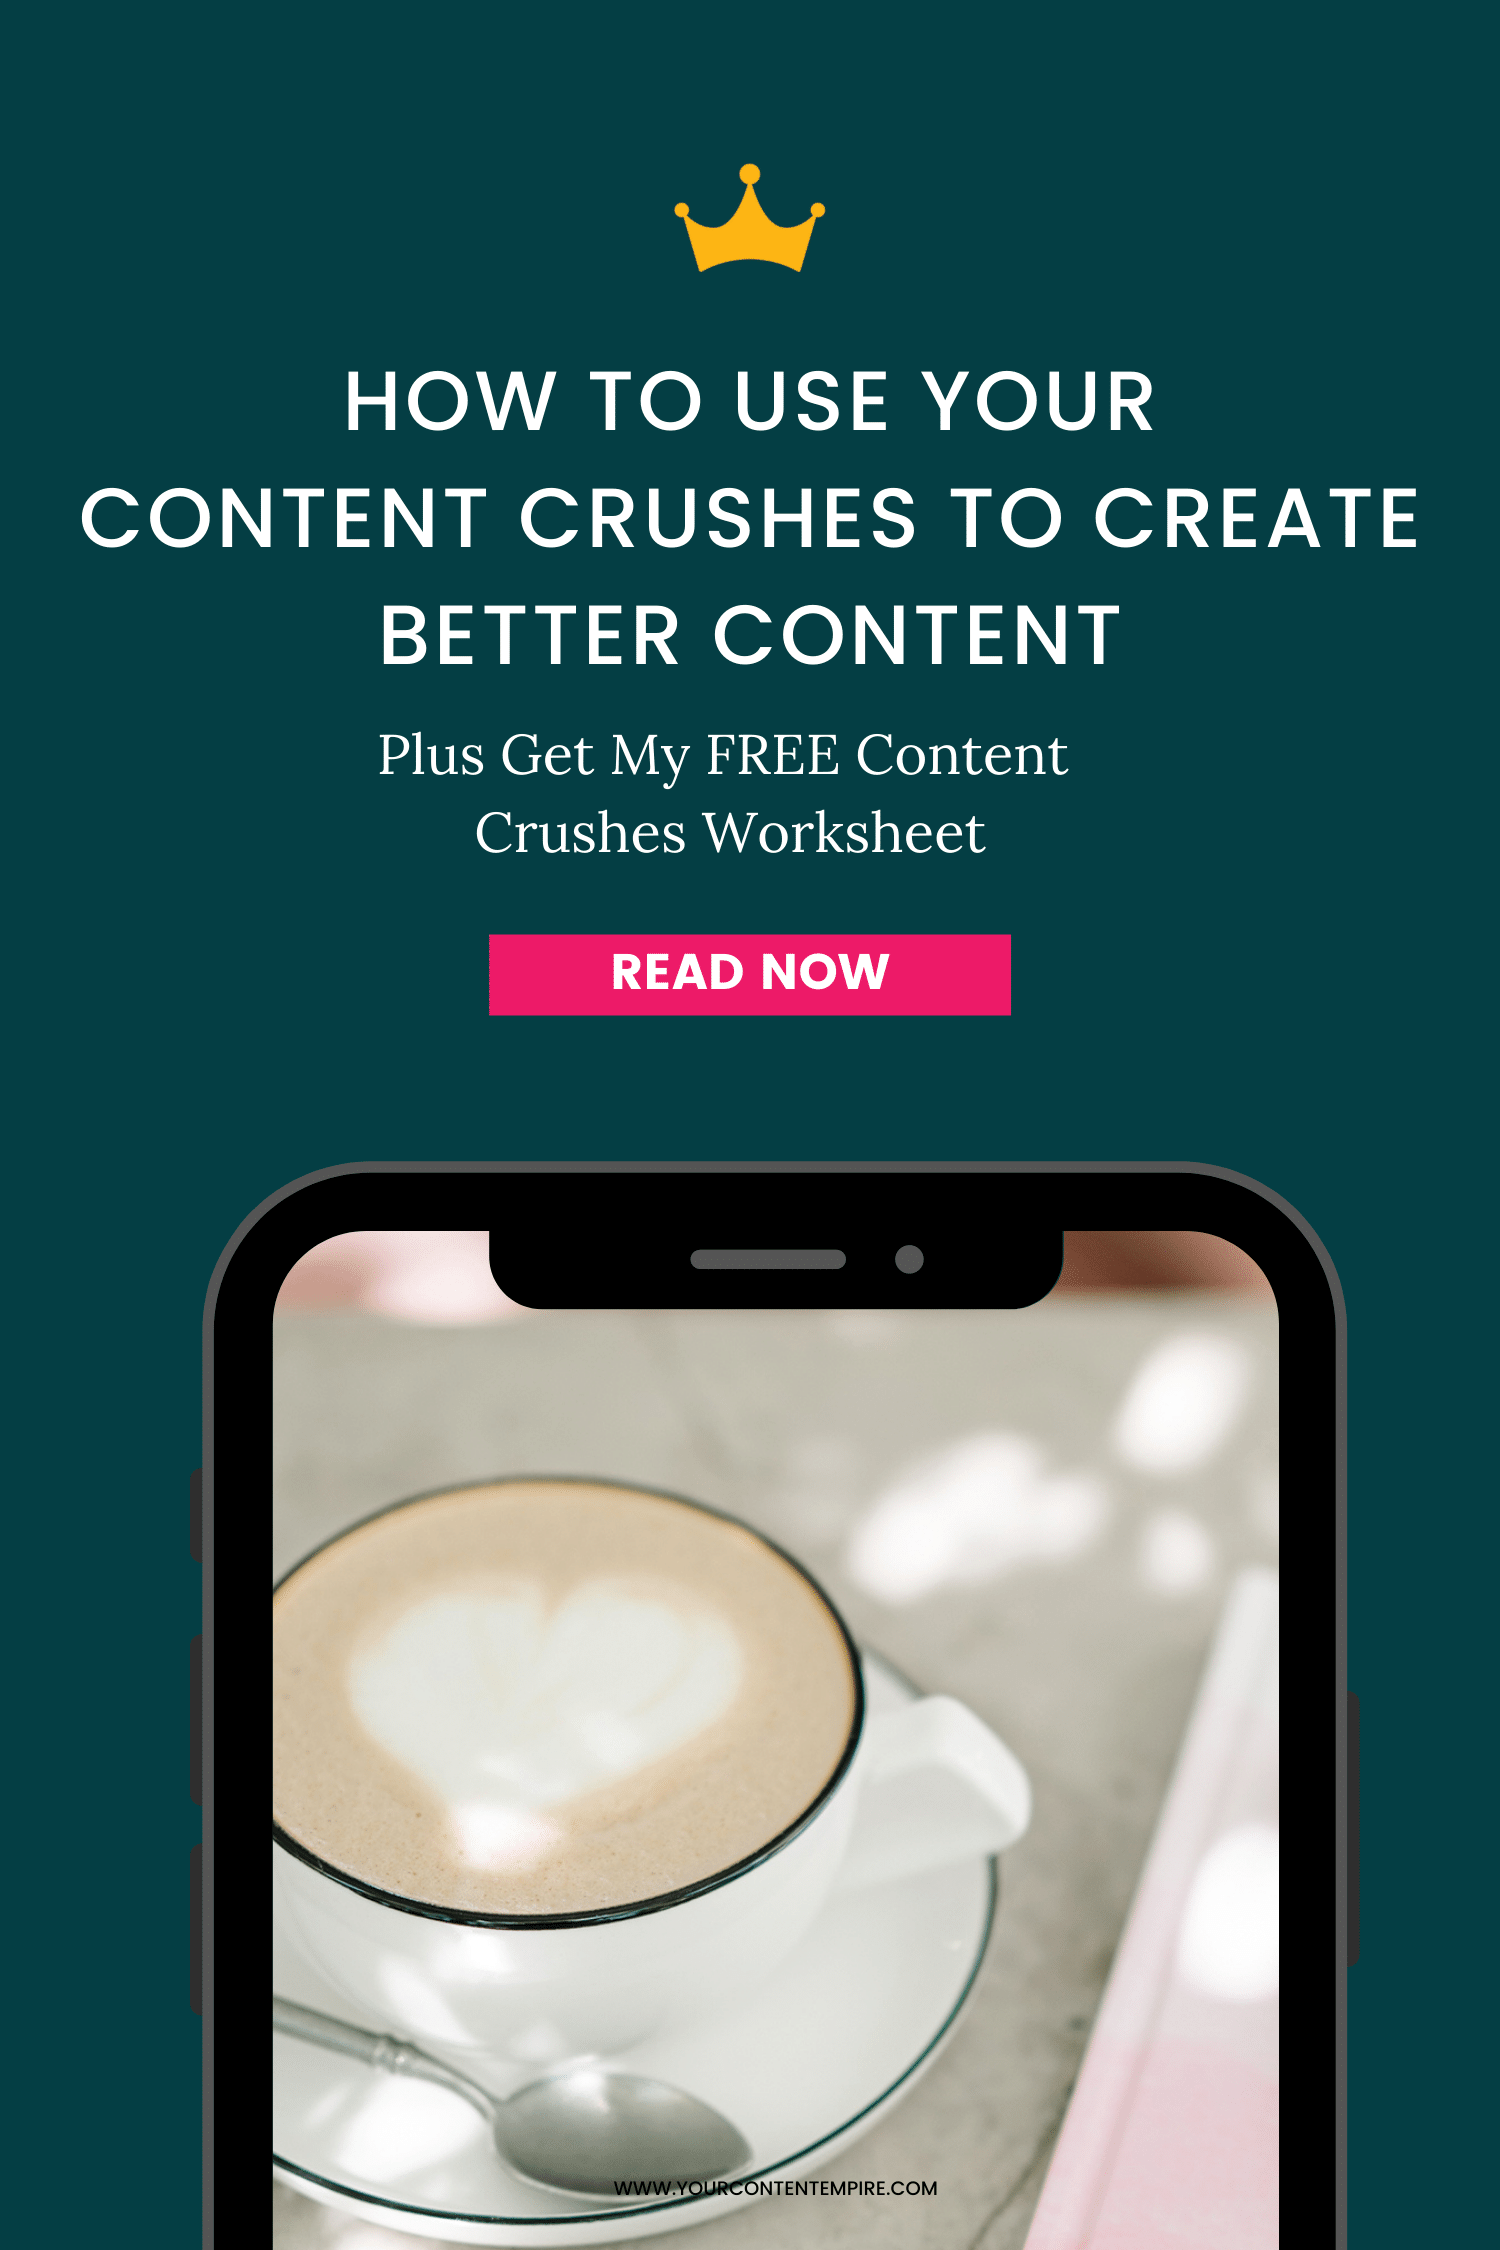 How to Use Your Content Crushes to Create Better Content